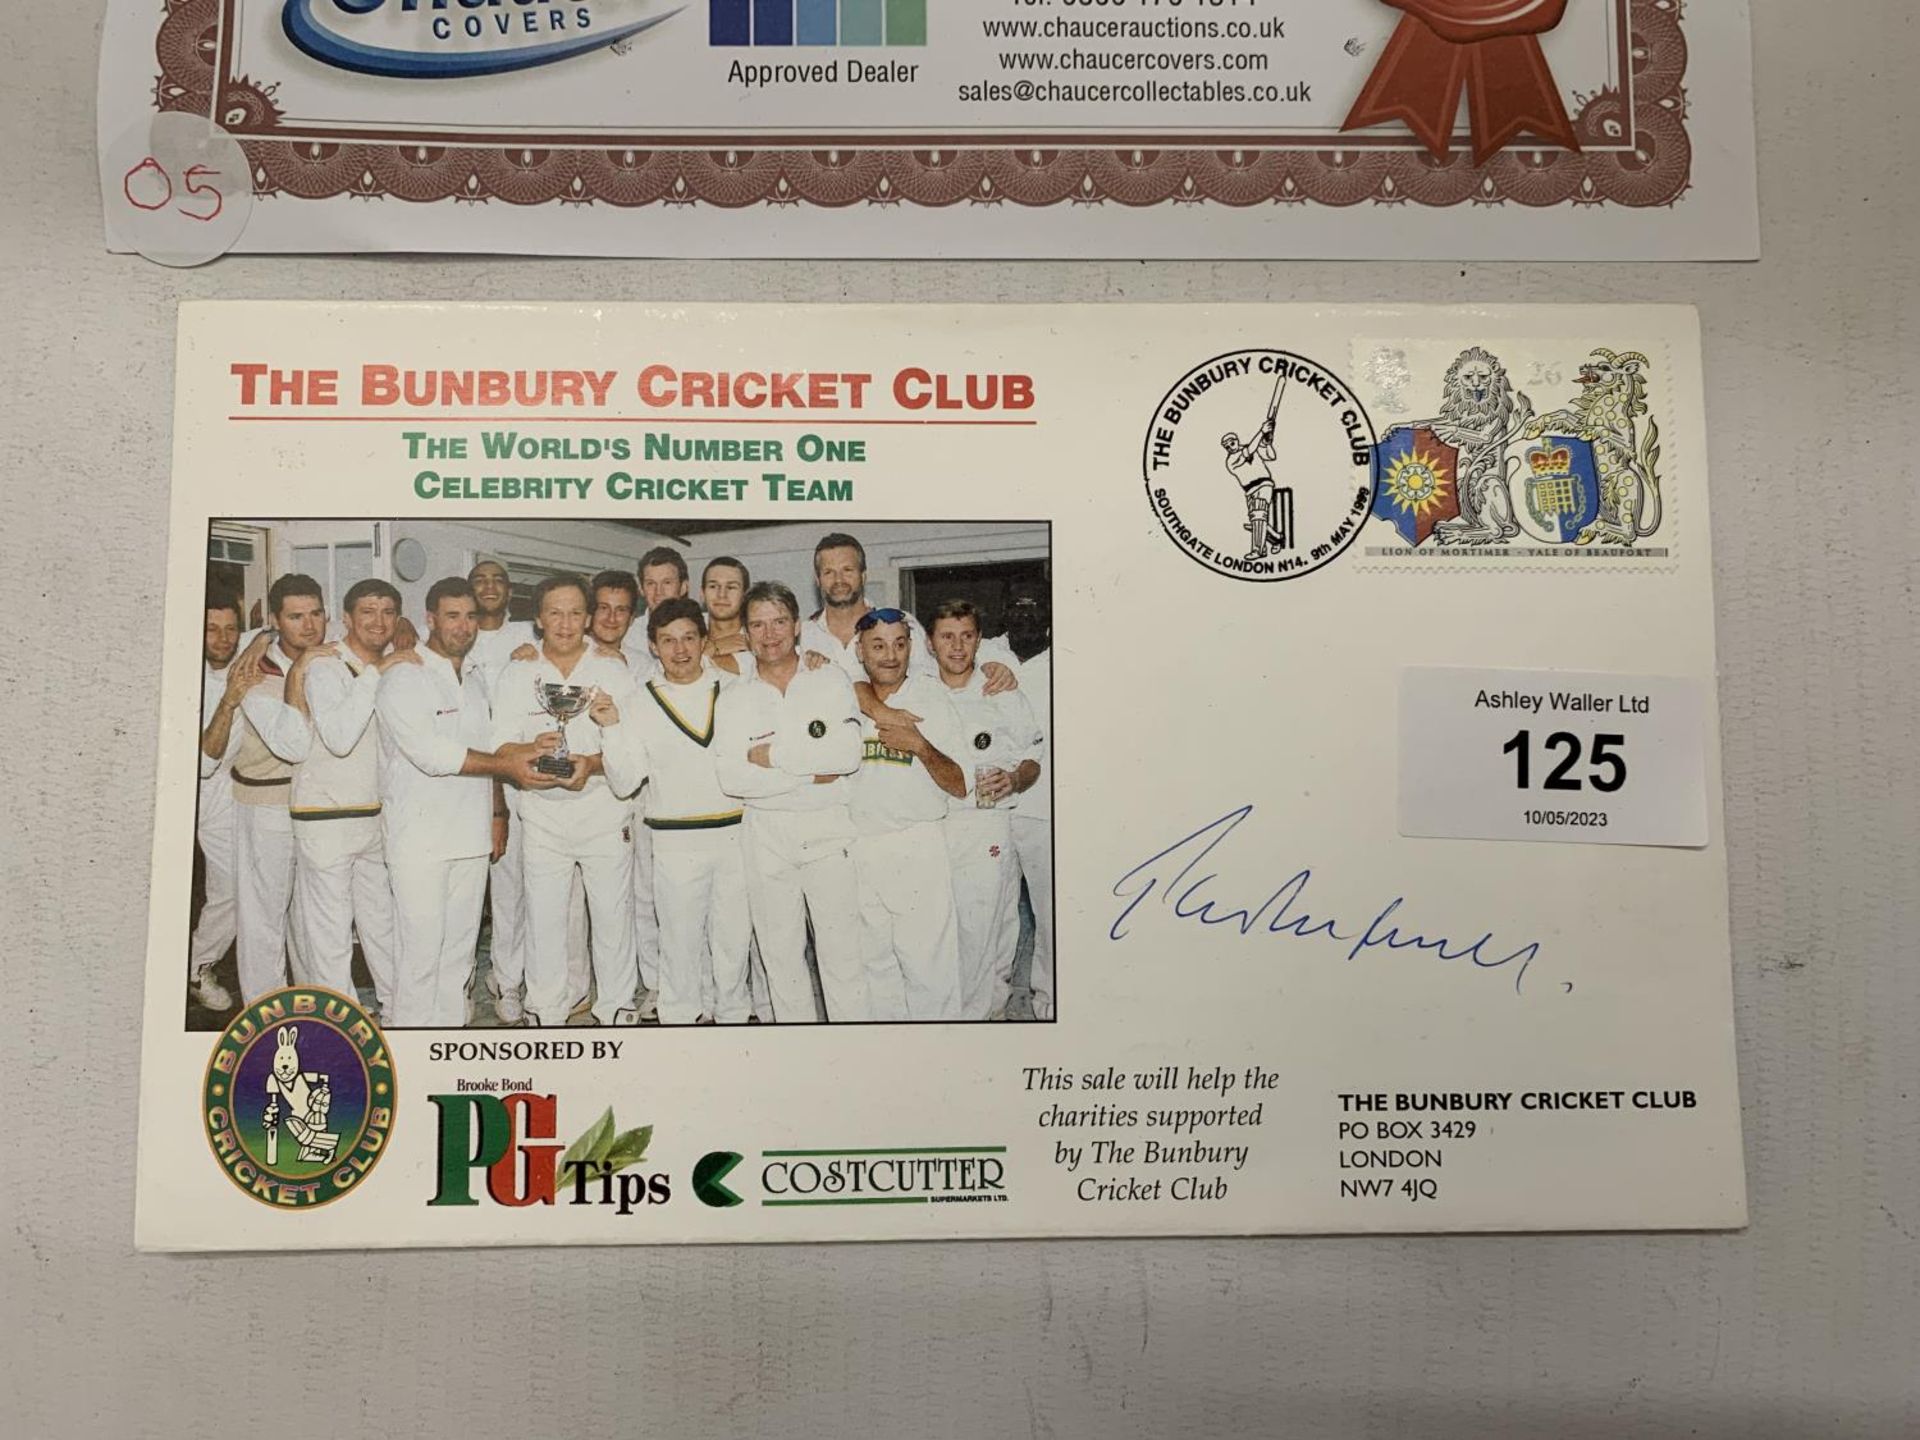 A BUNBURY CRICKET CLUB FIRST DAY COVER SIGNED BY PHIL TUFNELL WITH CERTIFCATE OF AUTHENTICITY - Image 3 of 4